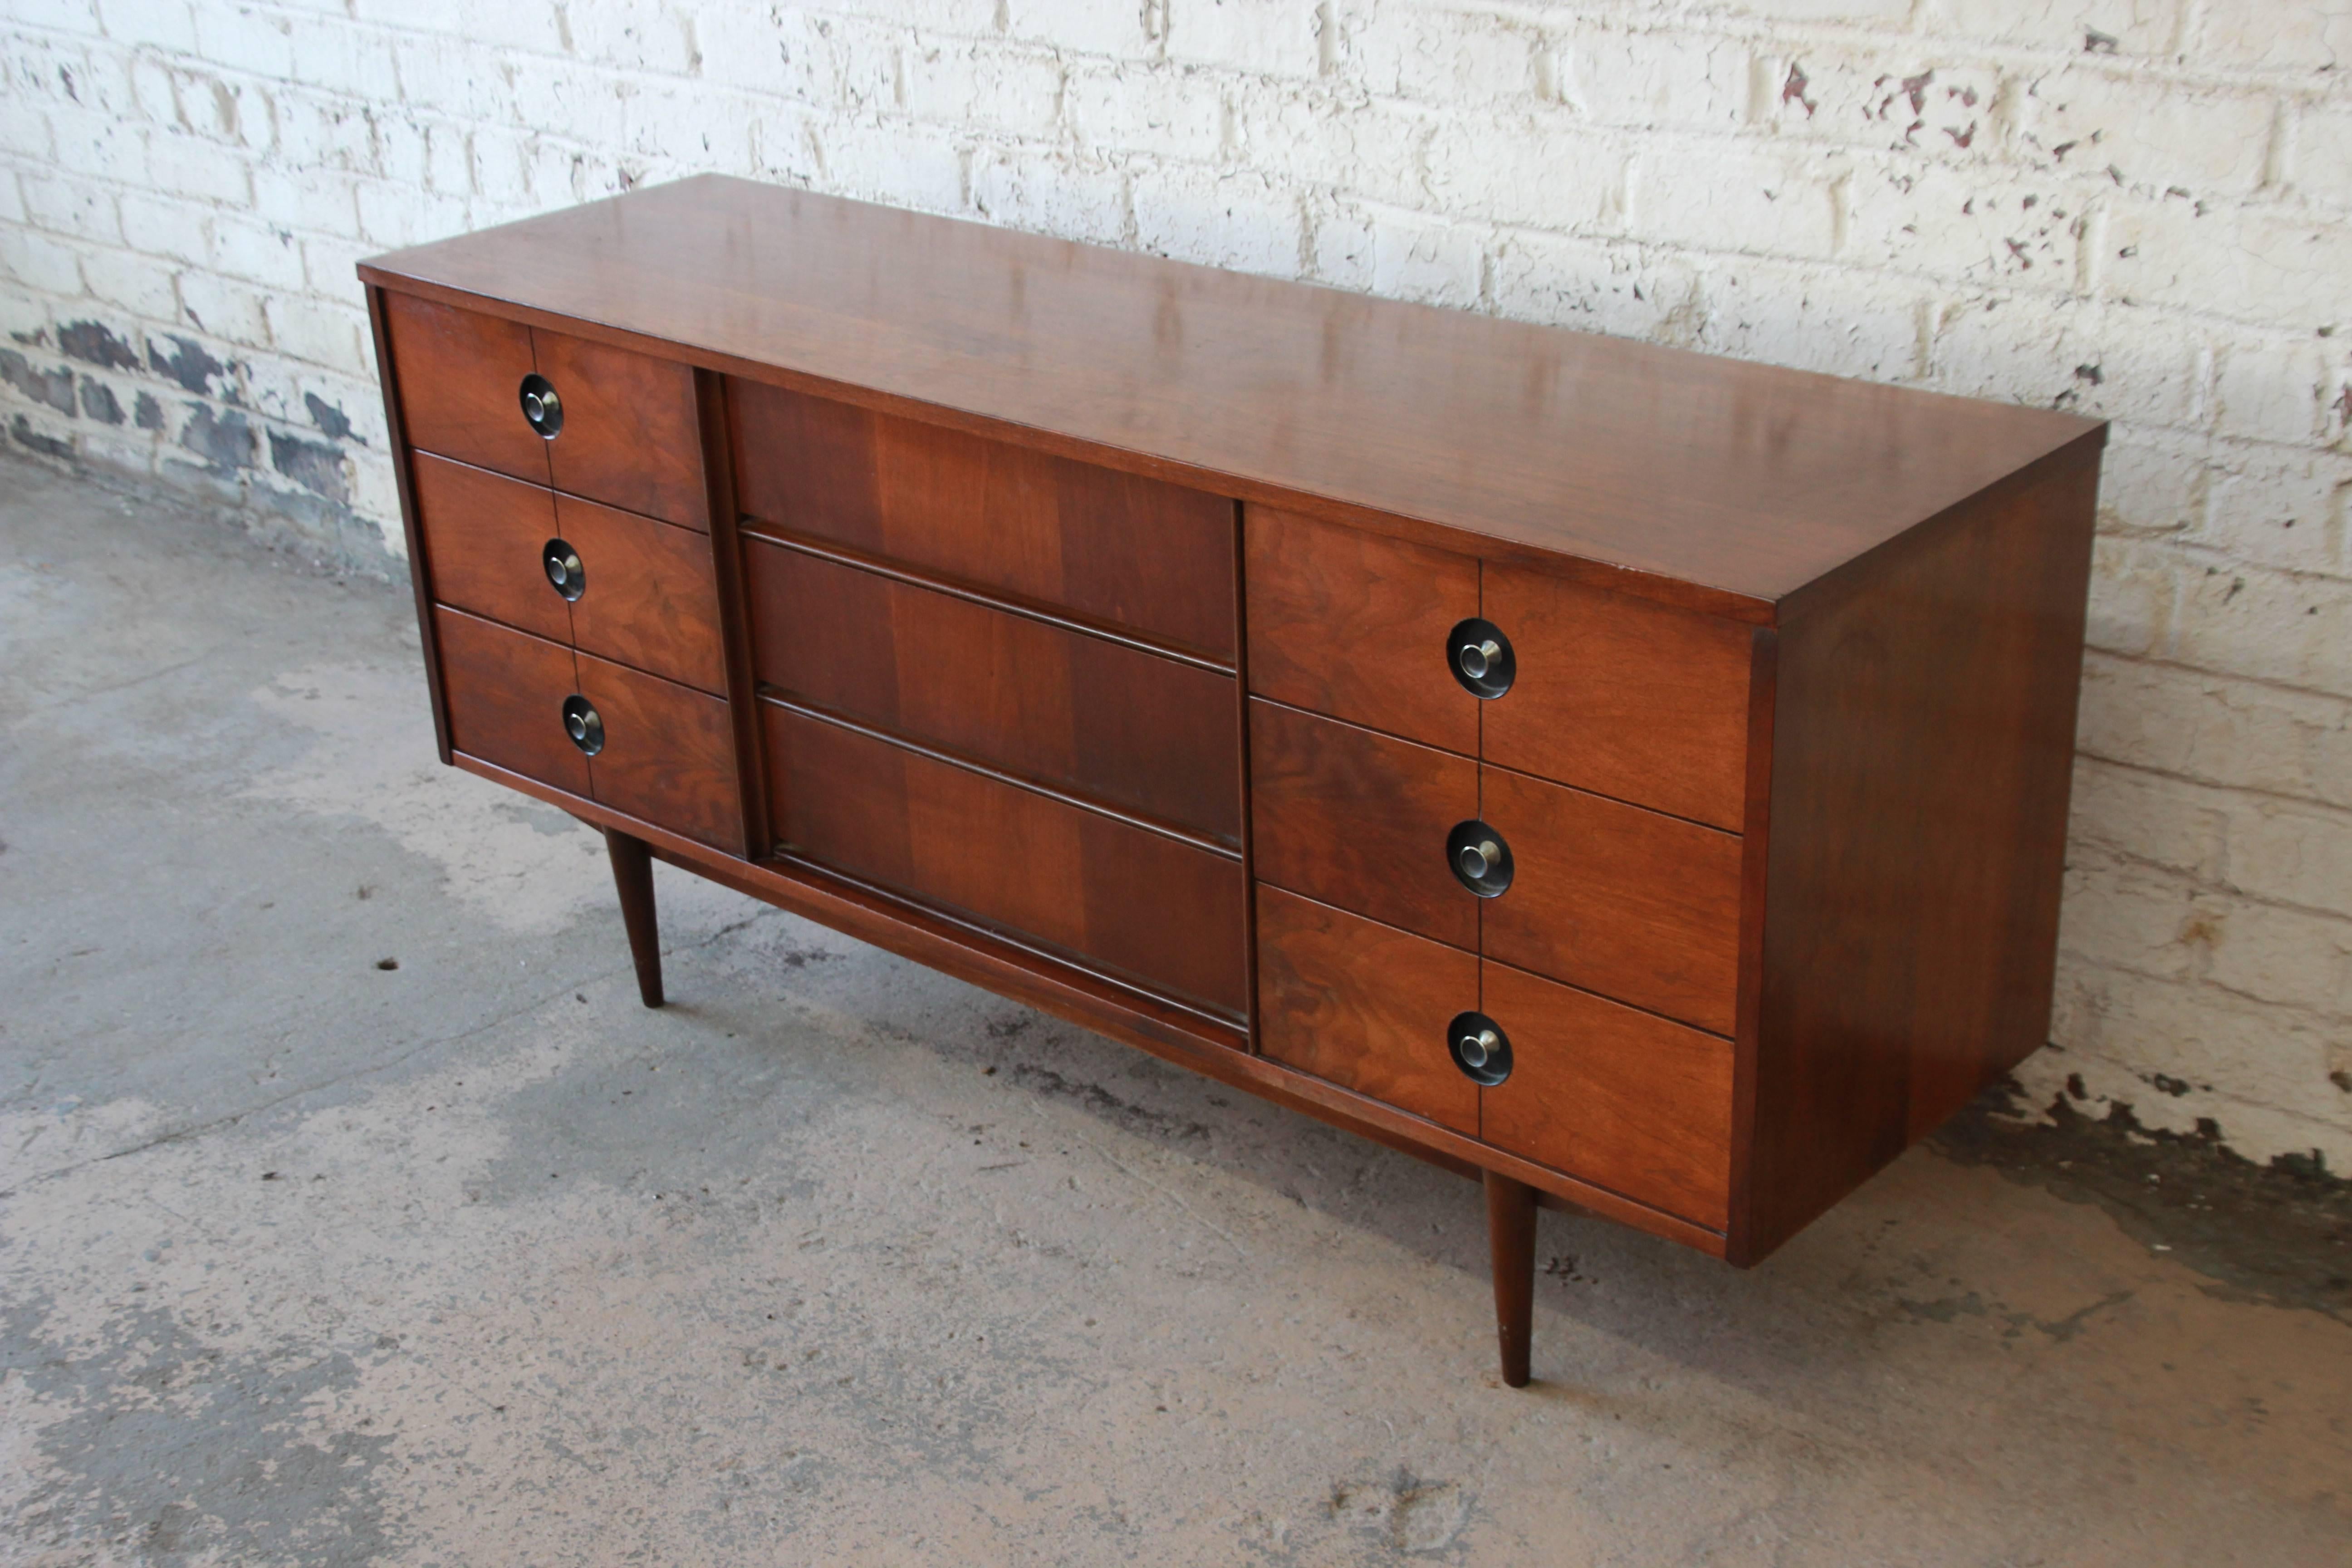 Offering a very nice Mid-Century Modern triple dresser or credenza from the Finnline Collection by Stanley Furniture. The credenza features gorgeous walnut wood grain and sleek mid-century lines. It offers ample room for storage, with nine deep